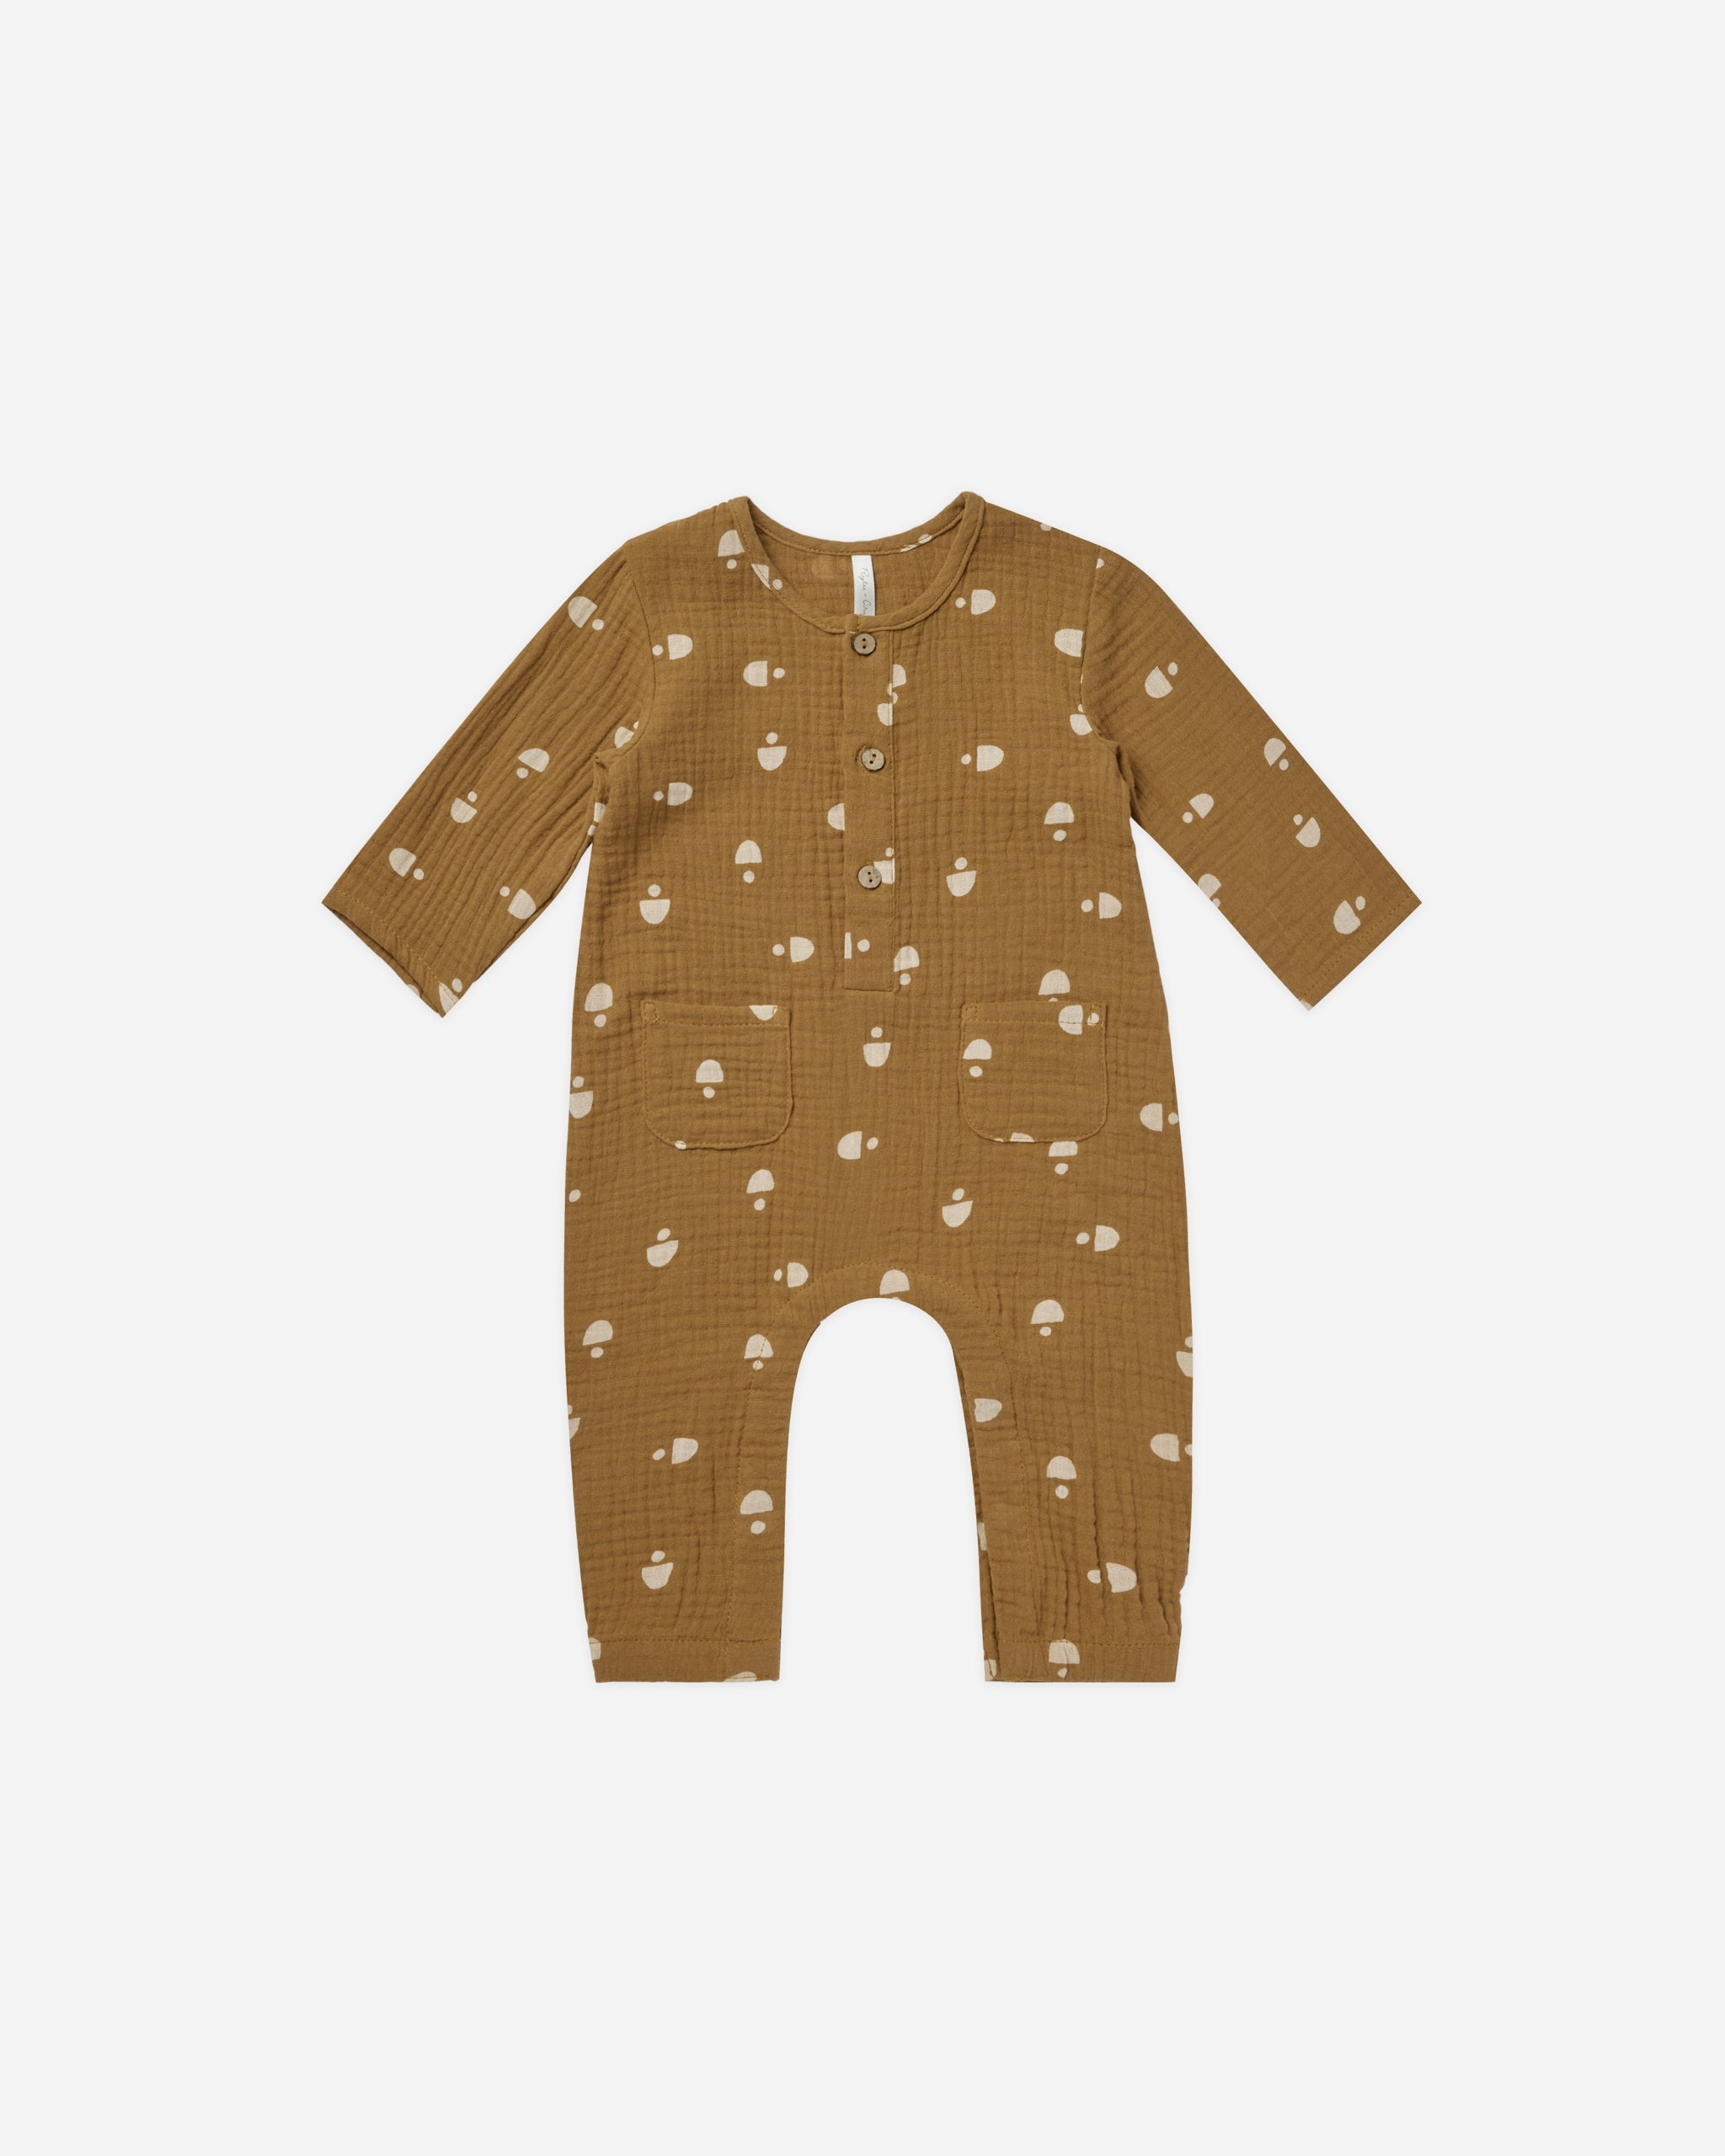 Long Sleeve Woven Jumpsuit || Geo - Rylee + Cru | Kids Clothes | Trendy Baby Clothes | Modern Infant Outfits |